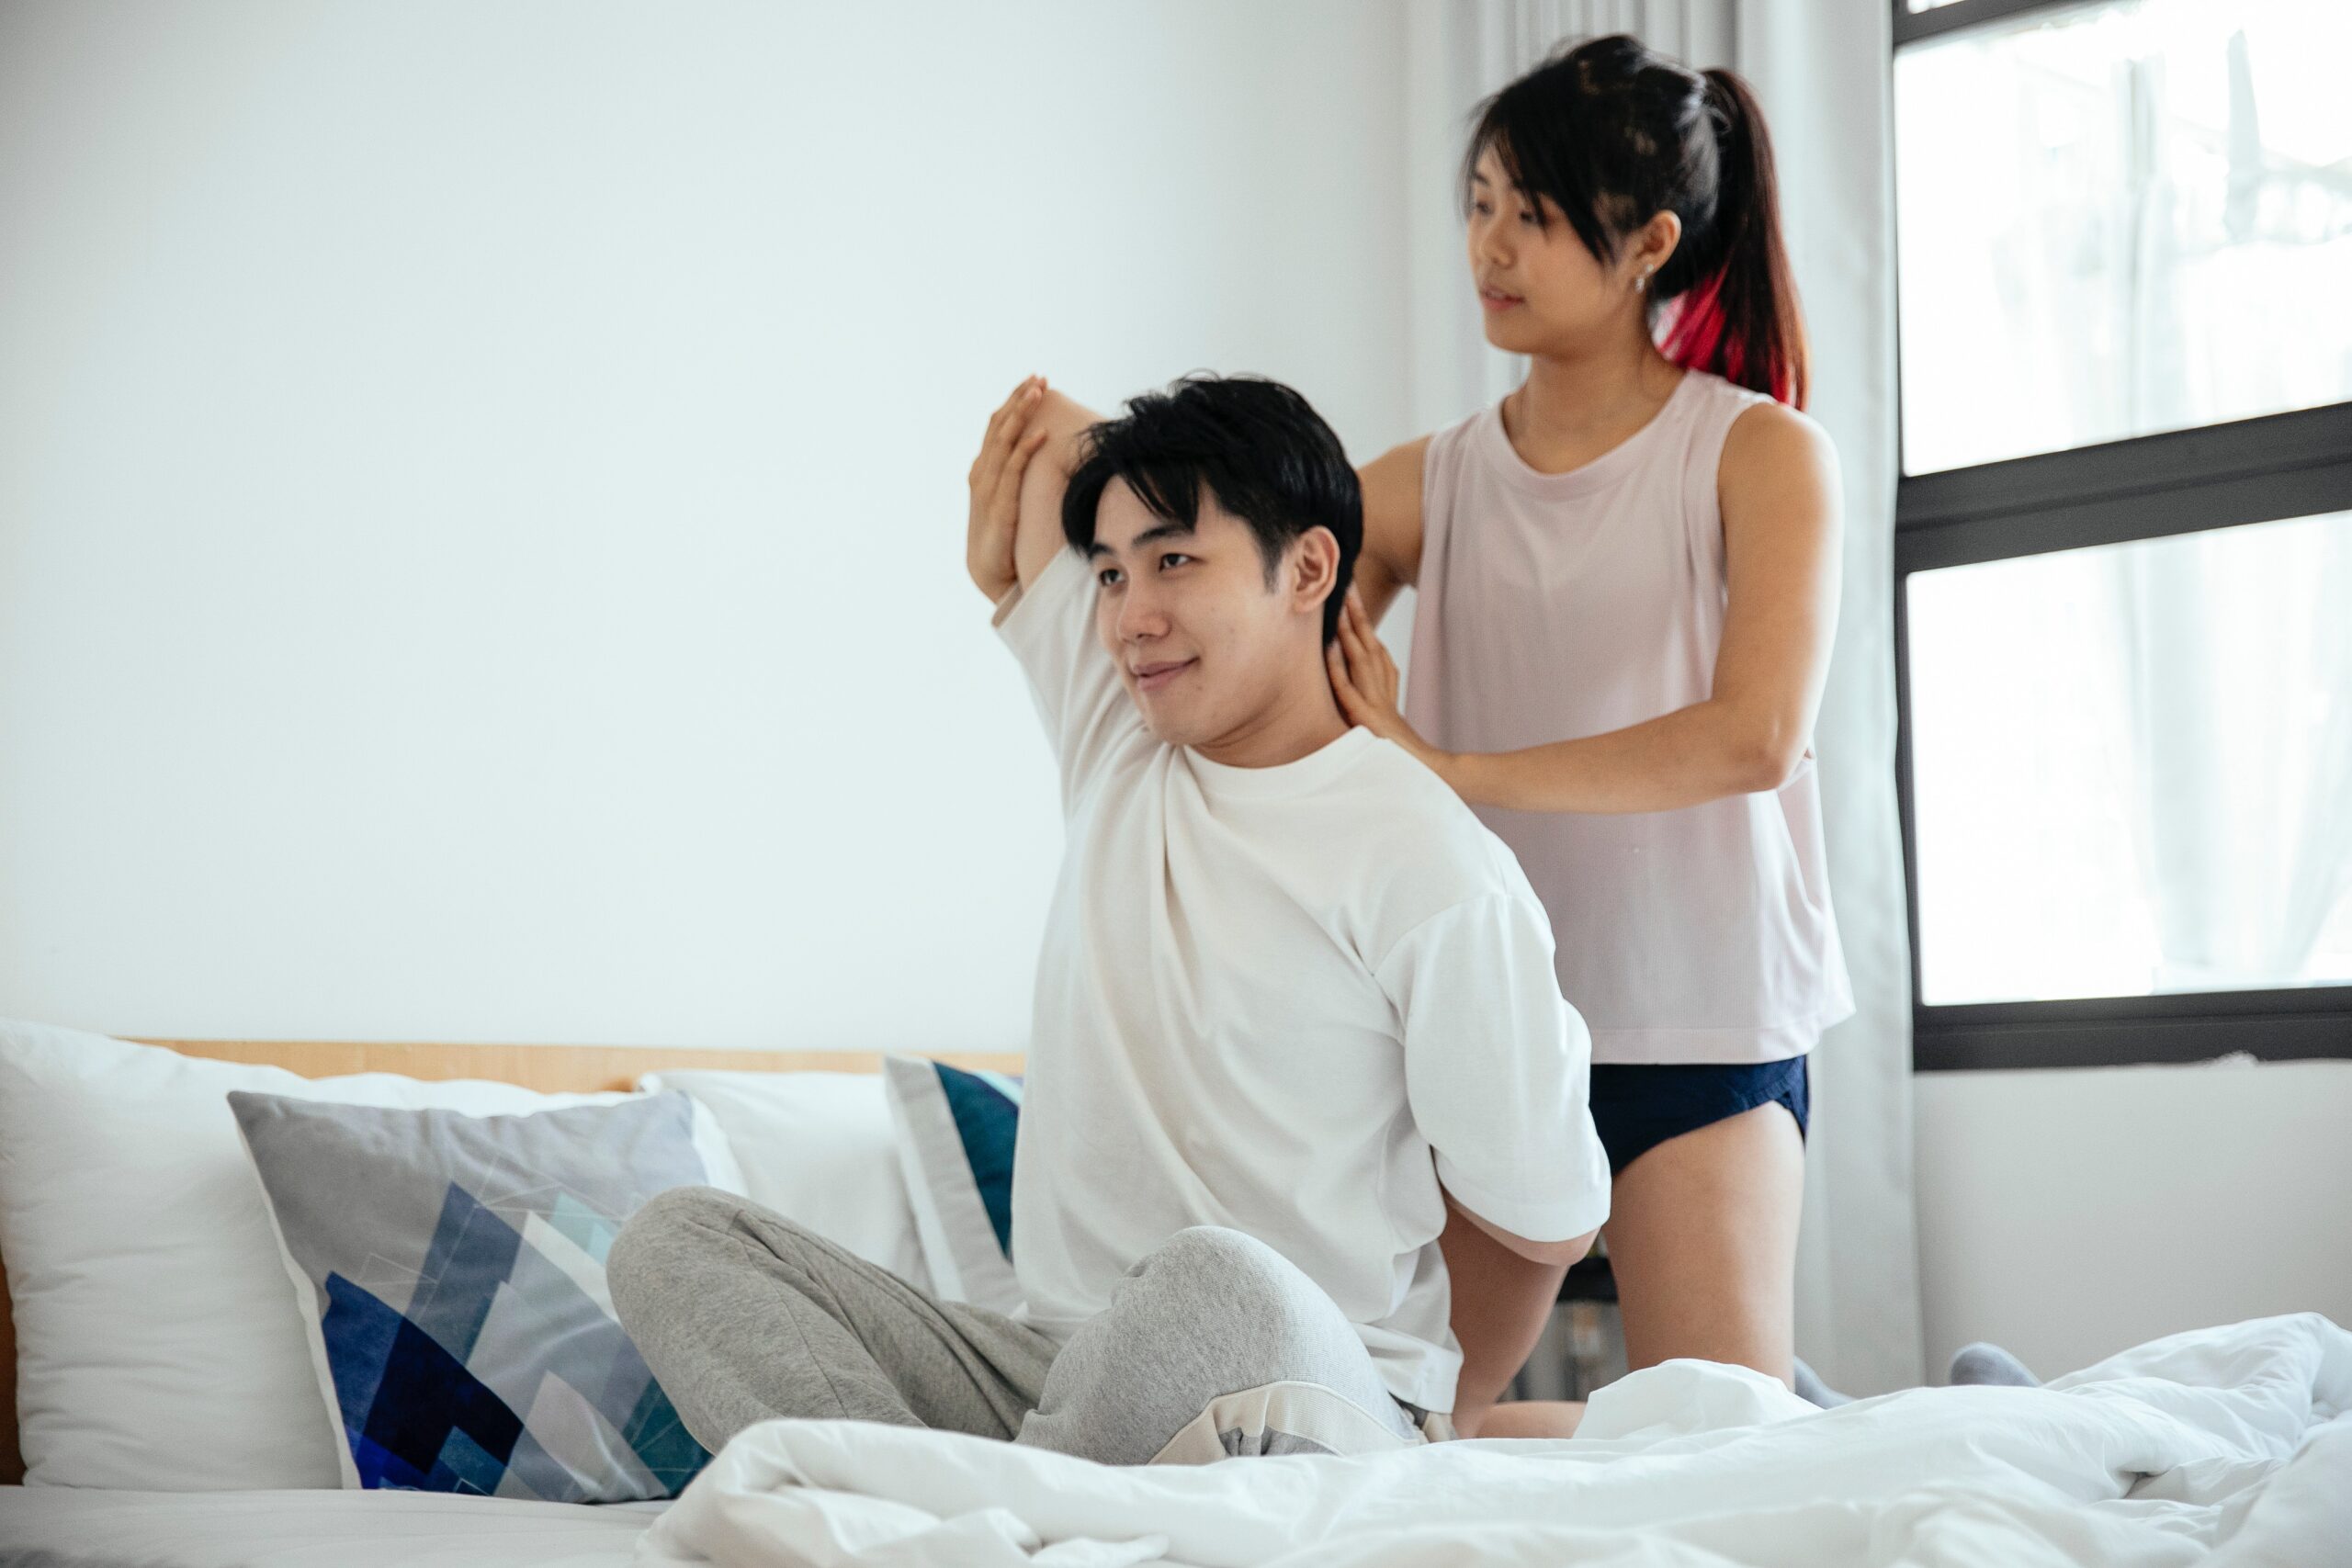 Young woman helping a partner with bedtime workout challenge stretching for fitness